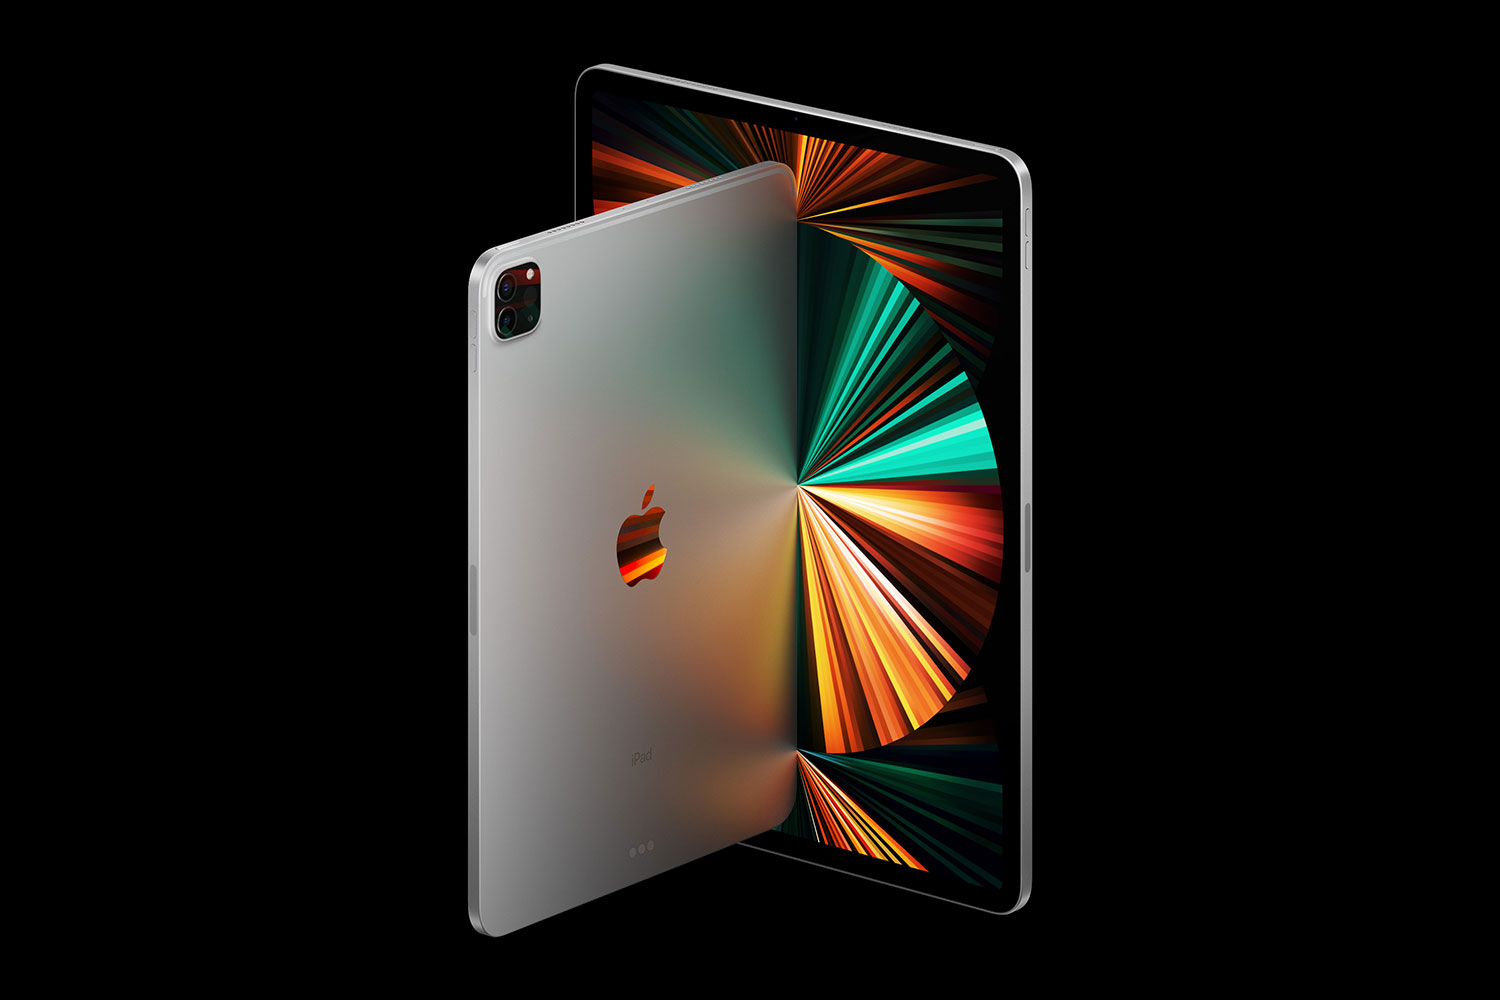 Apple Introduces New iPad Pro with M1 Chip